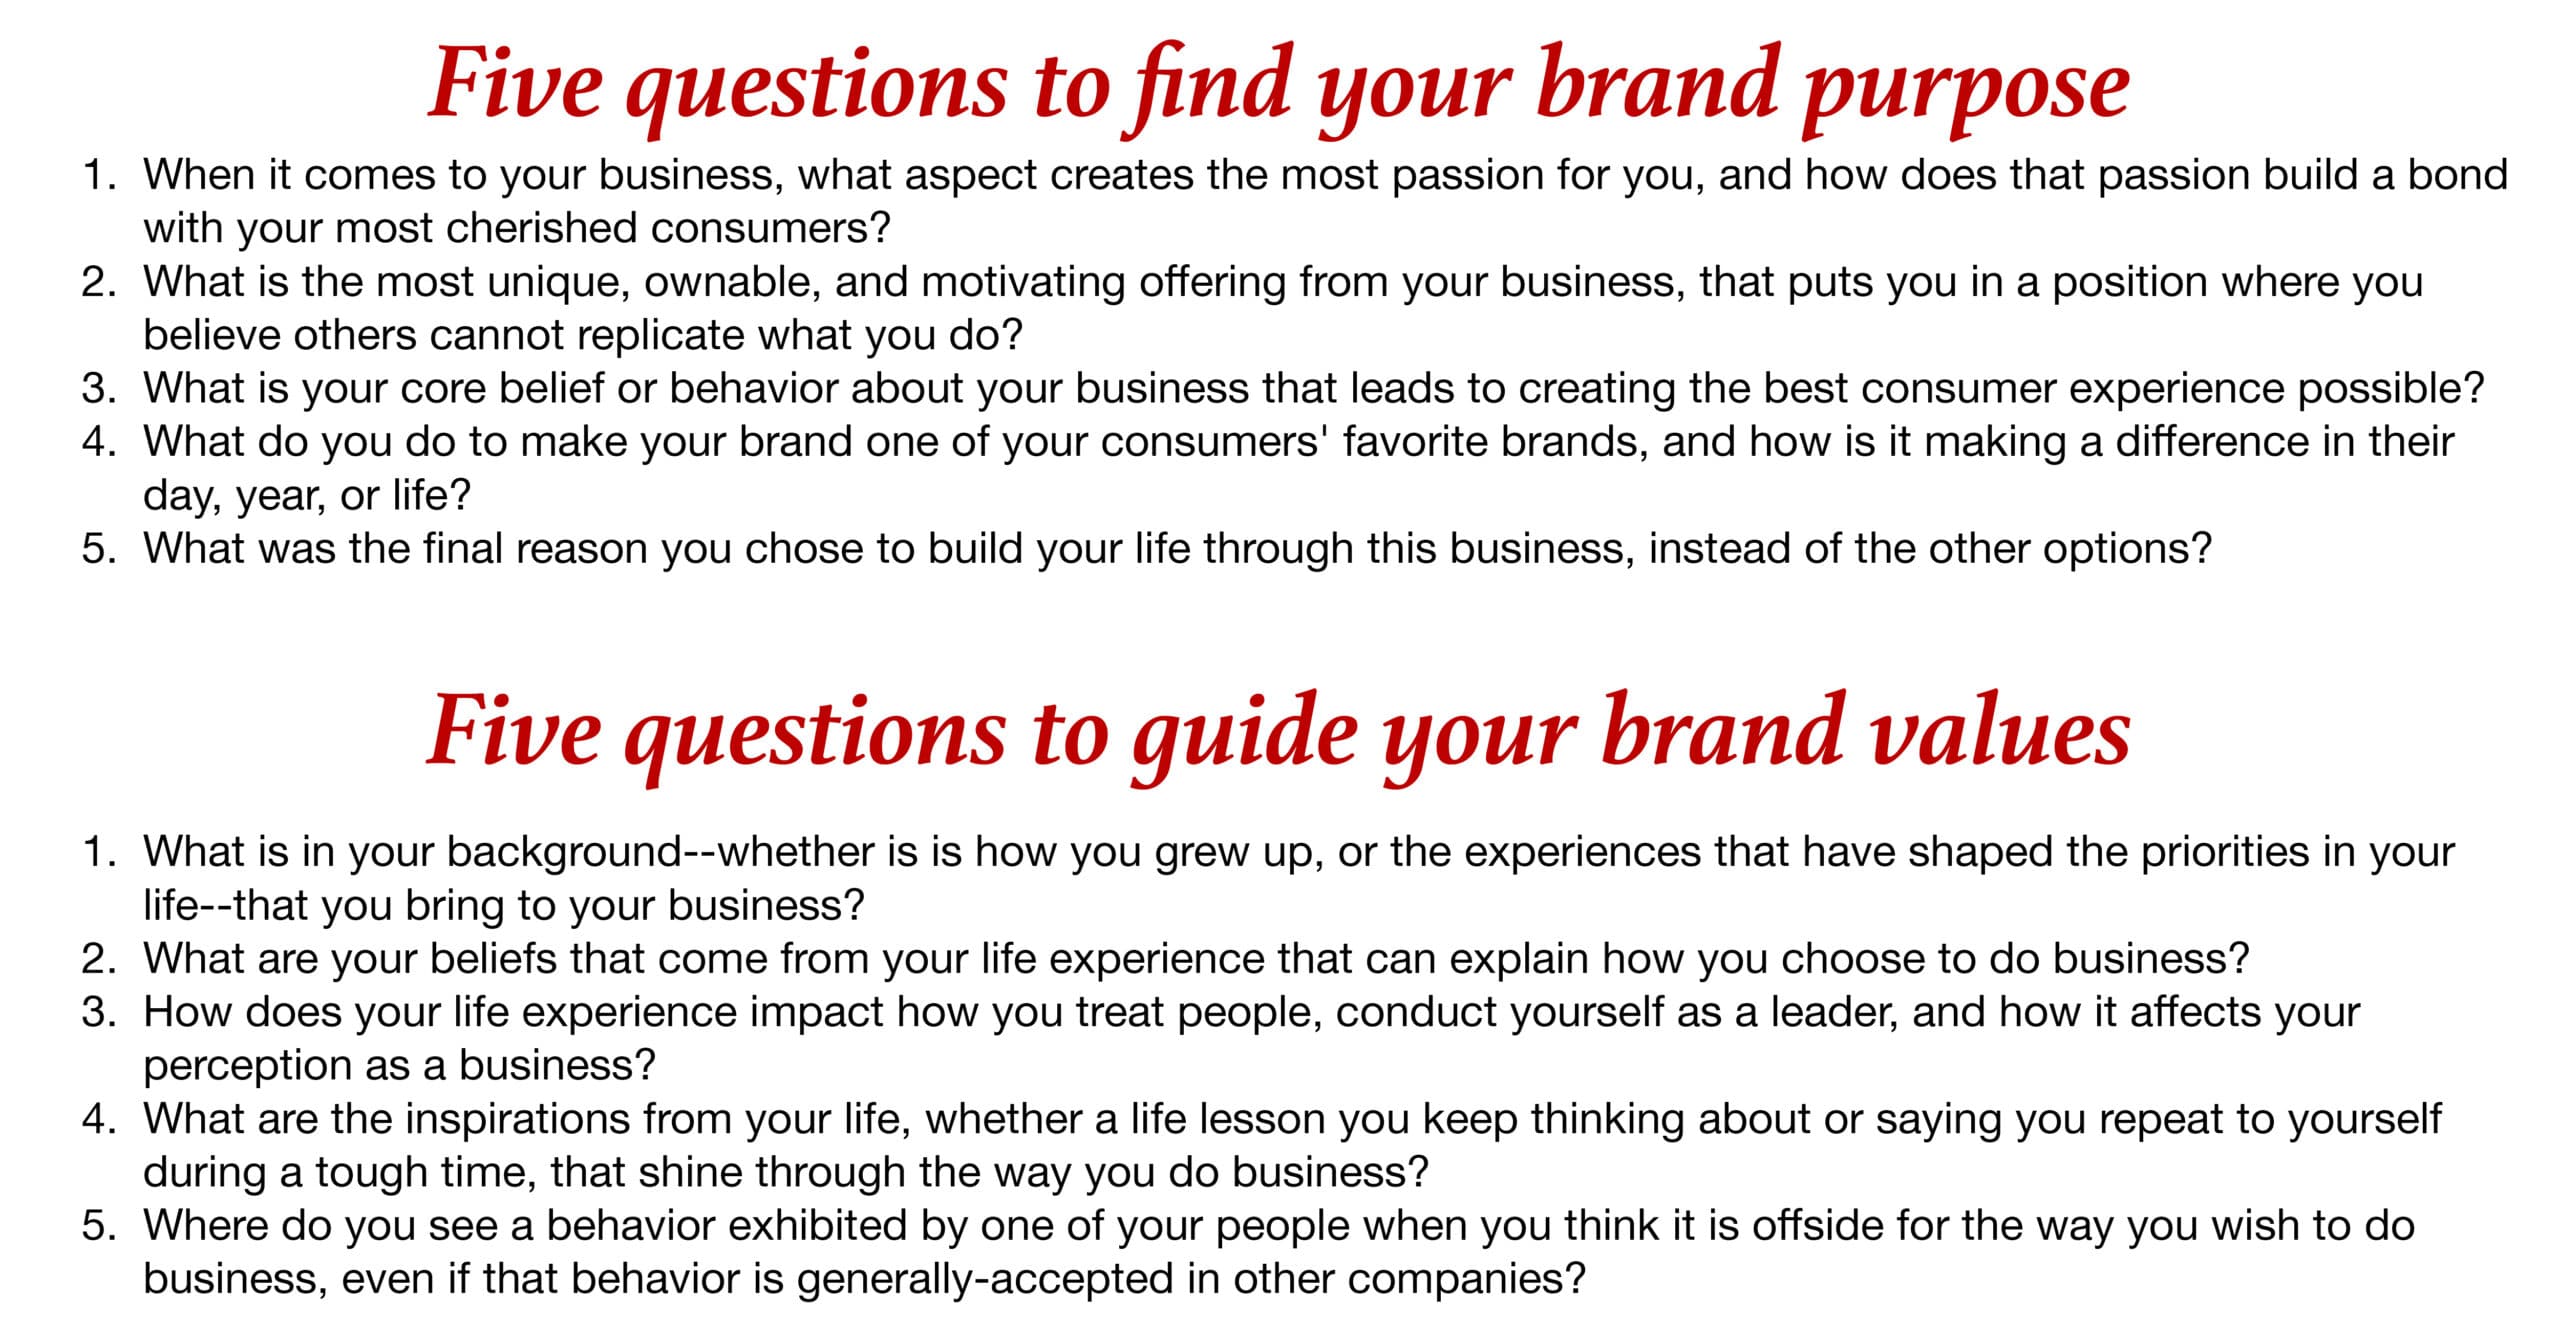 Finding your Brand Purpose to use in your strategic plan